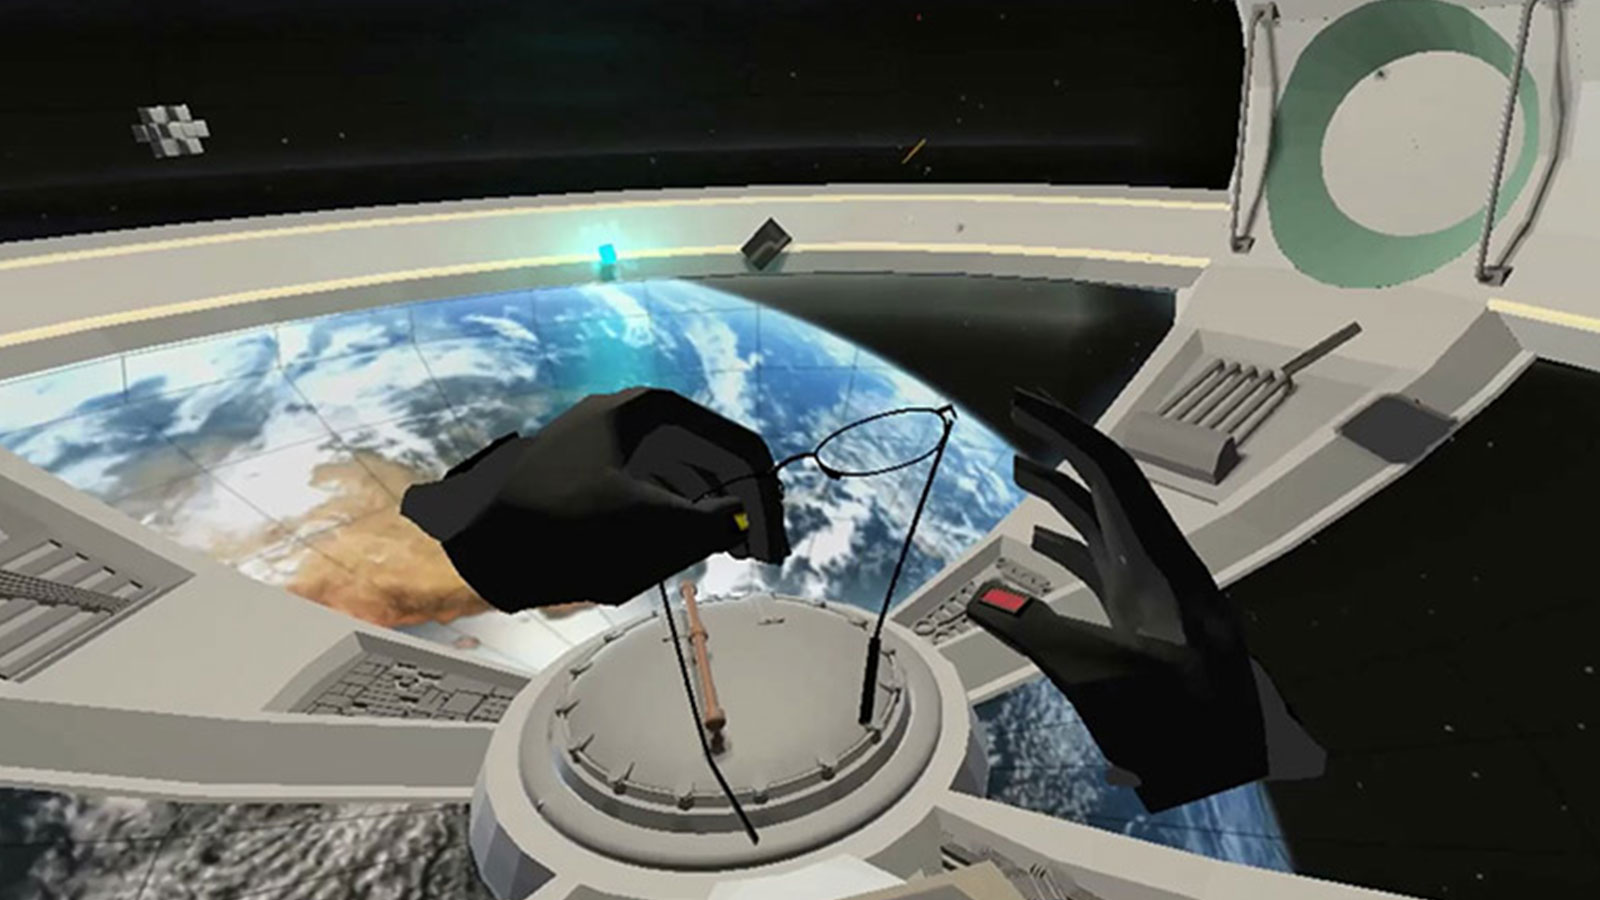 Moving VR objects in space